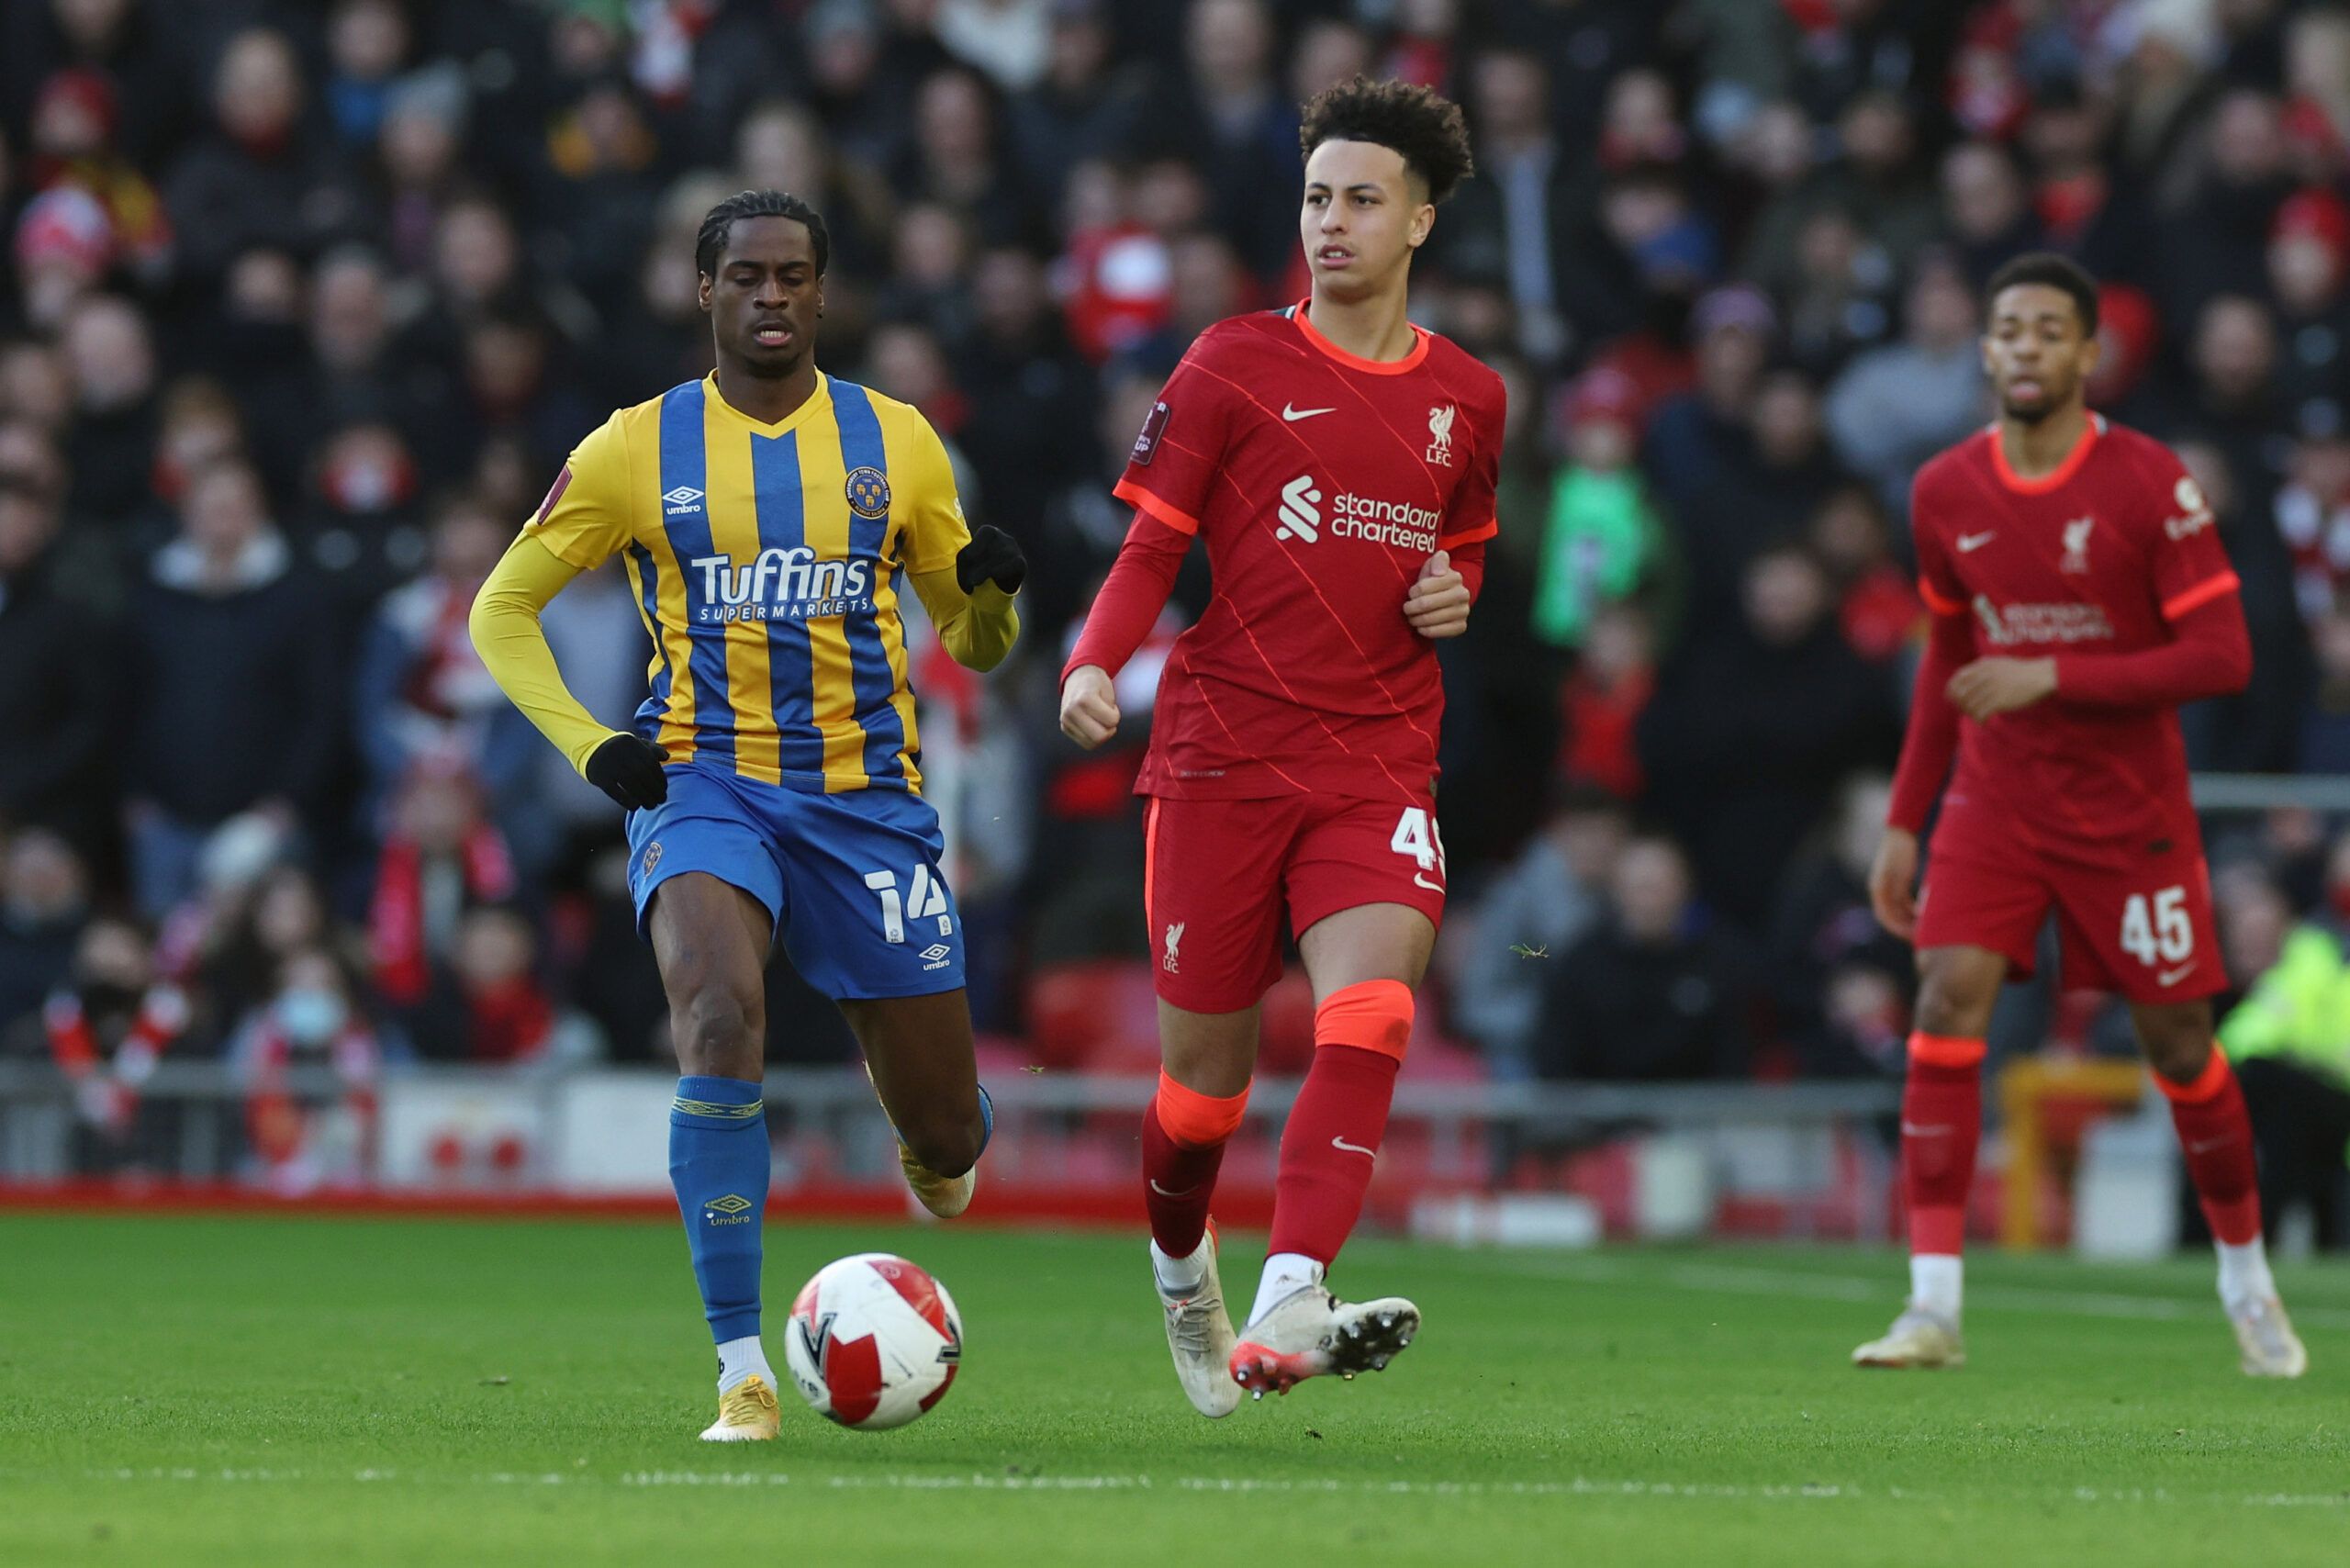 Soccer Football - FA Cup Third Round - Liverpool v Shrewsbury Town - Anfield, Liverpool, Britain - January 9, 2022 Shrewsbury Town's Nathanael Ogbeta in action with Liverpool's Kaide Gordon REUTERS/Phil Noble